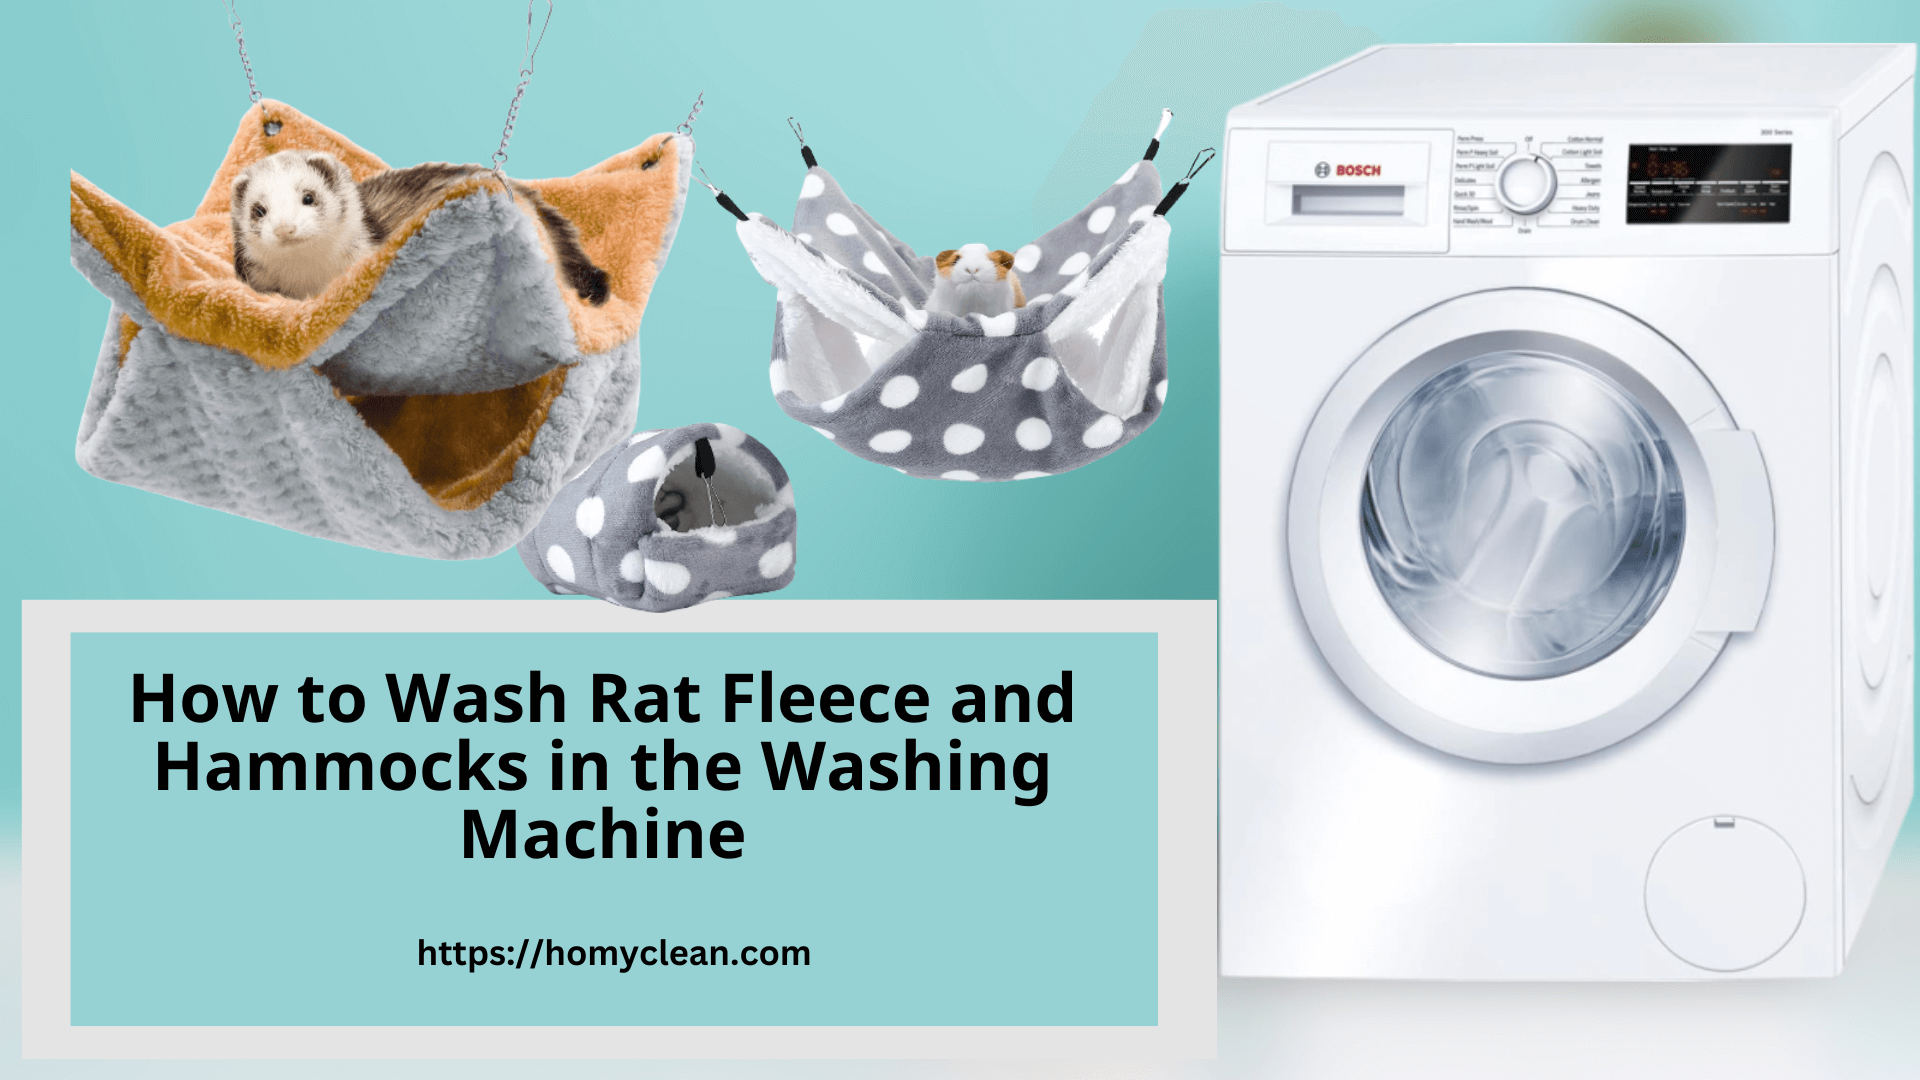 How to clean Rat Fleece and Hammocks in the Washing Machine